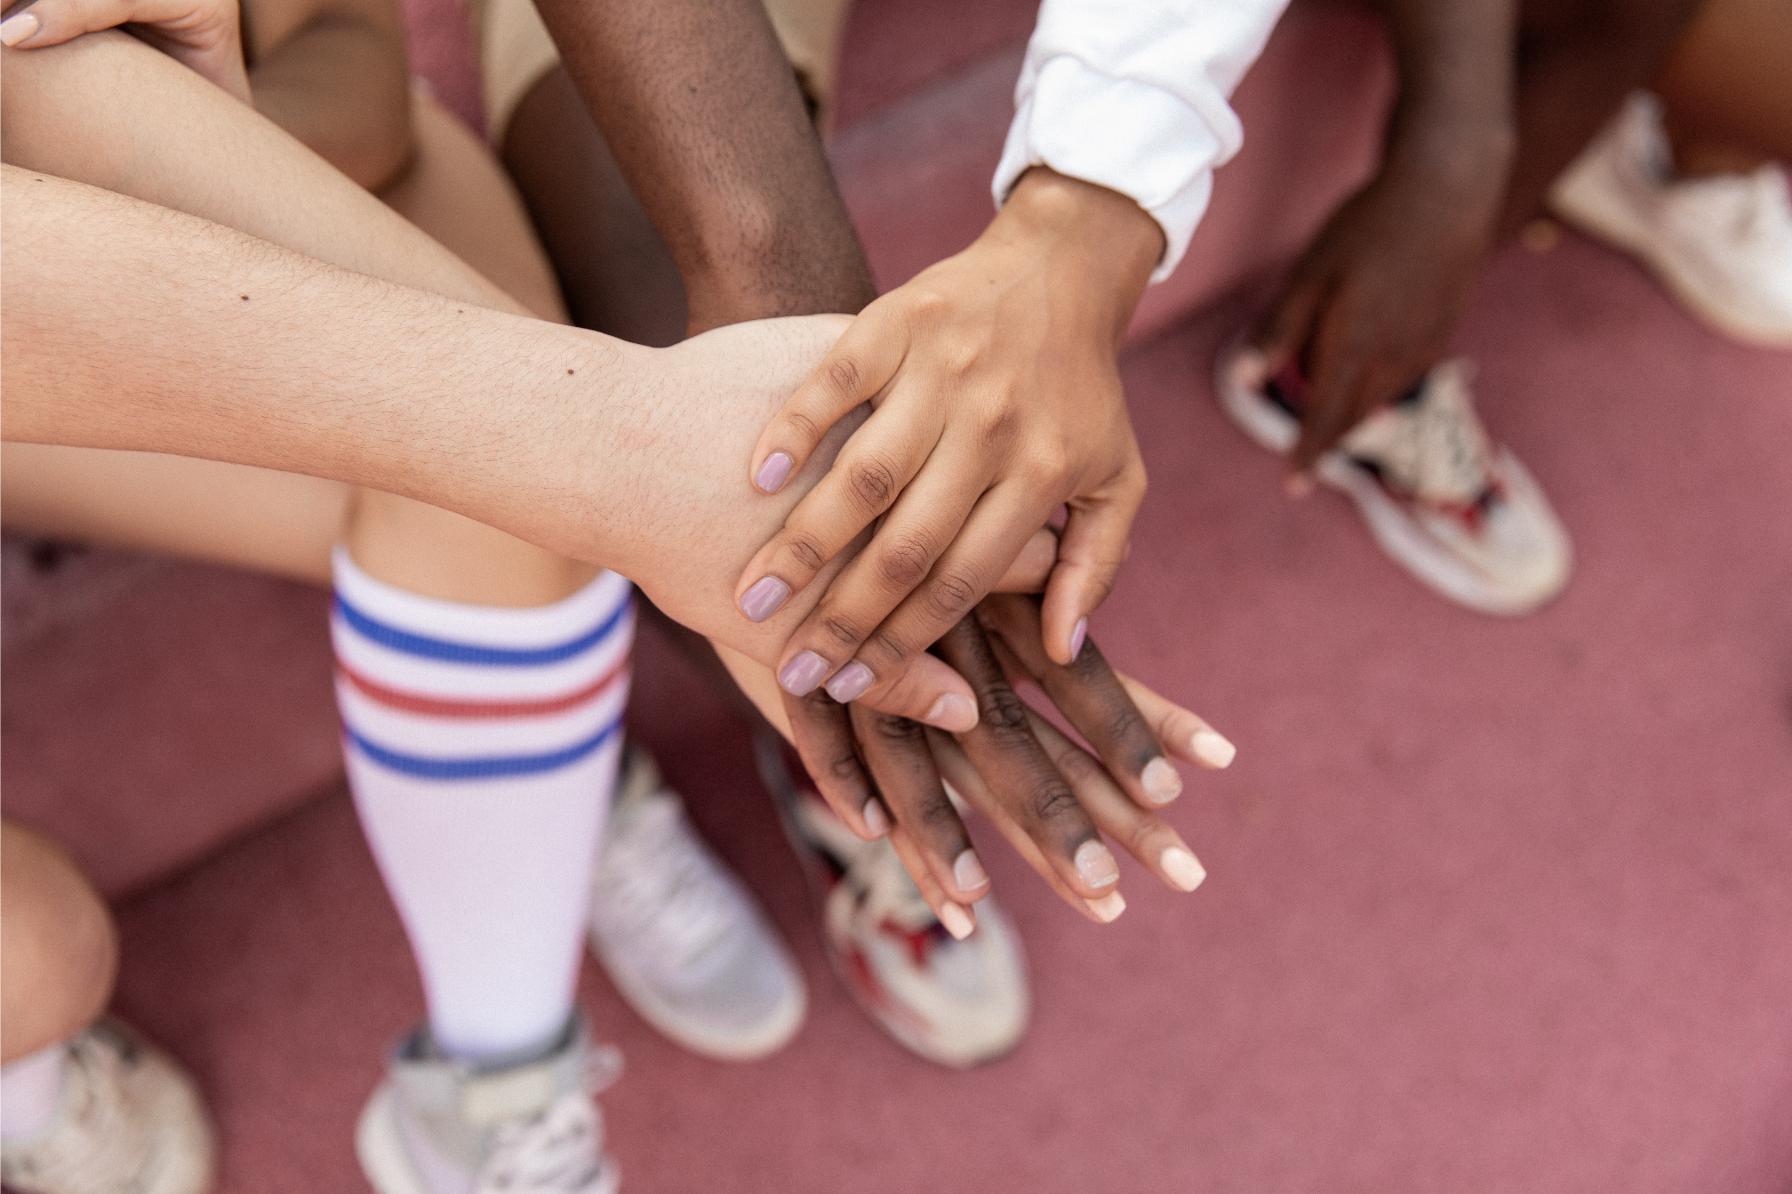 Many hands join together, representing fundraising as a team effort.